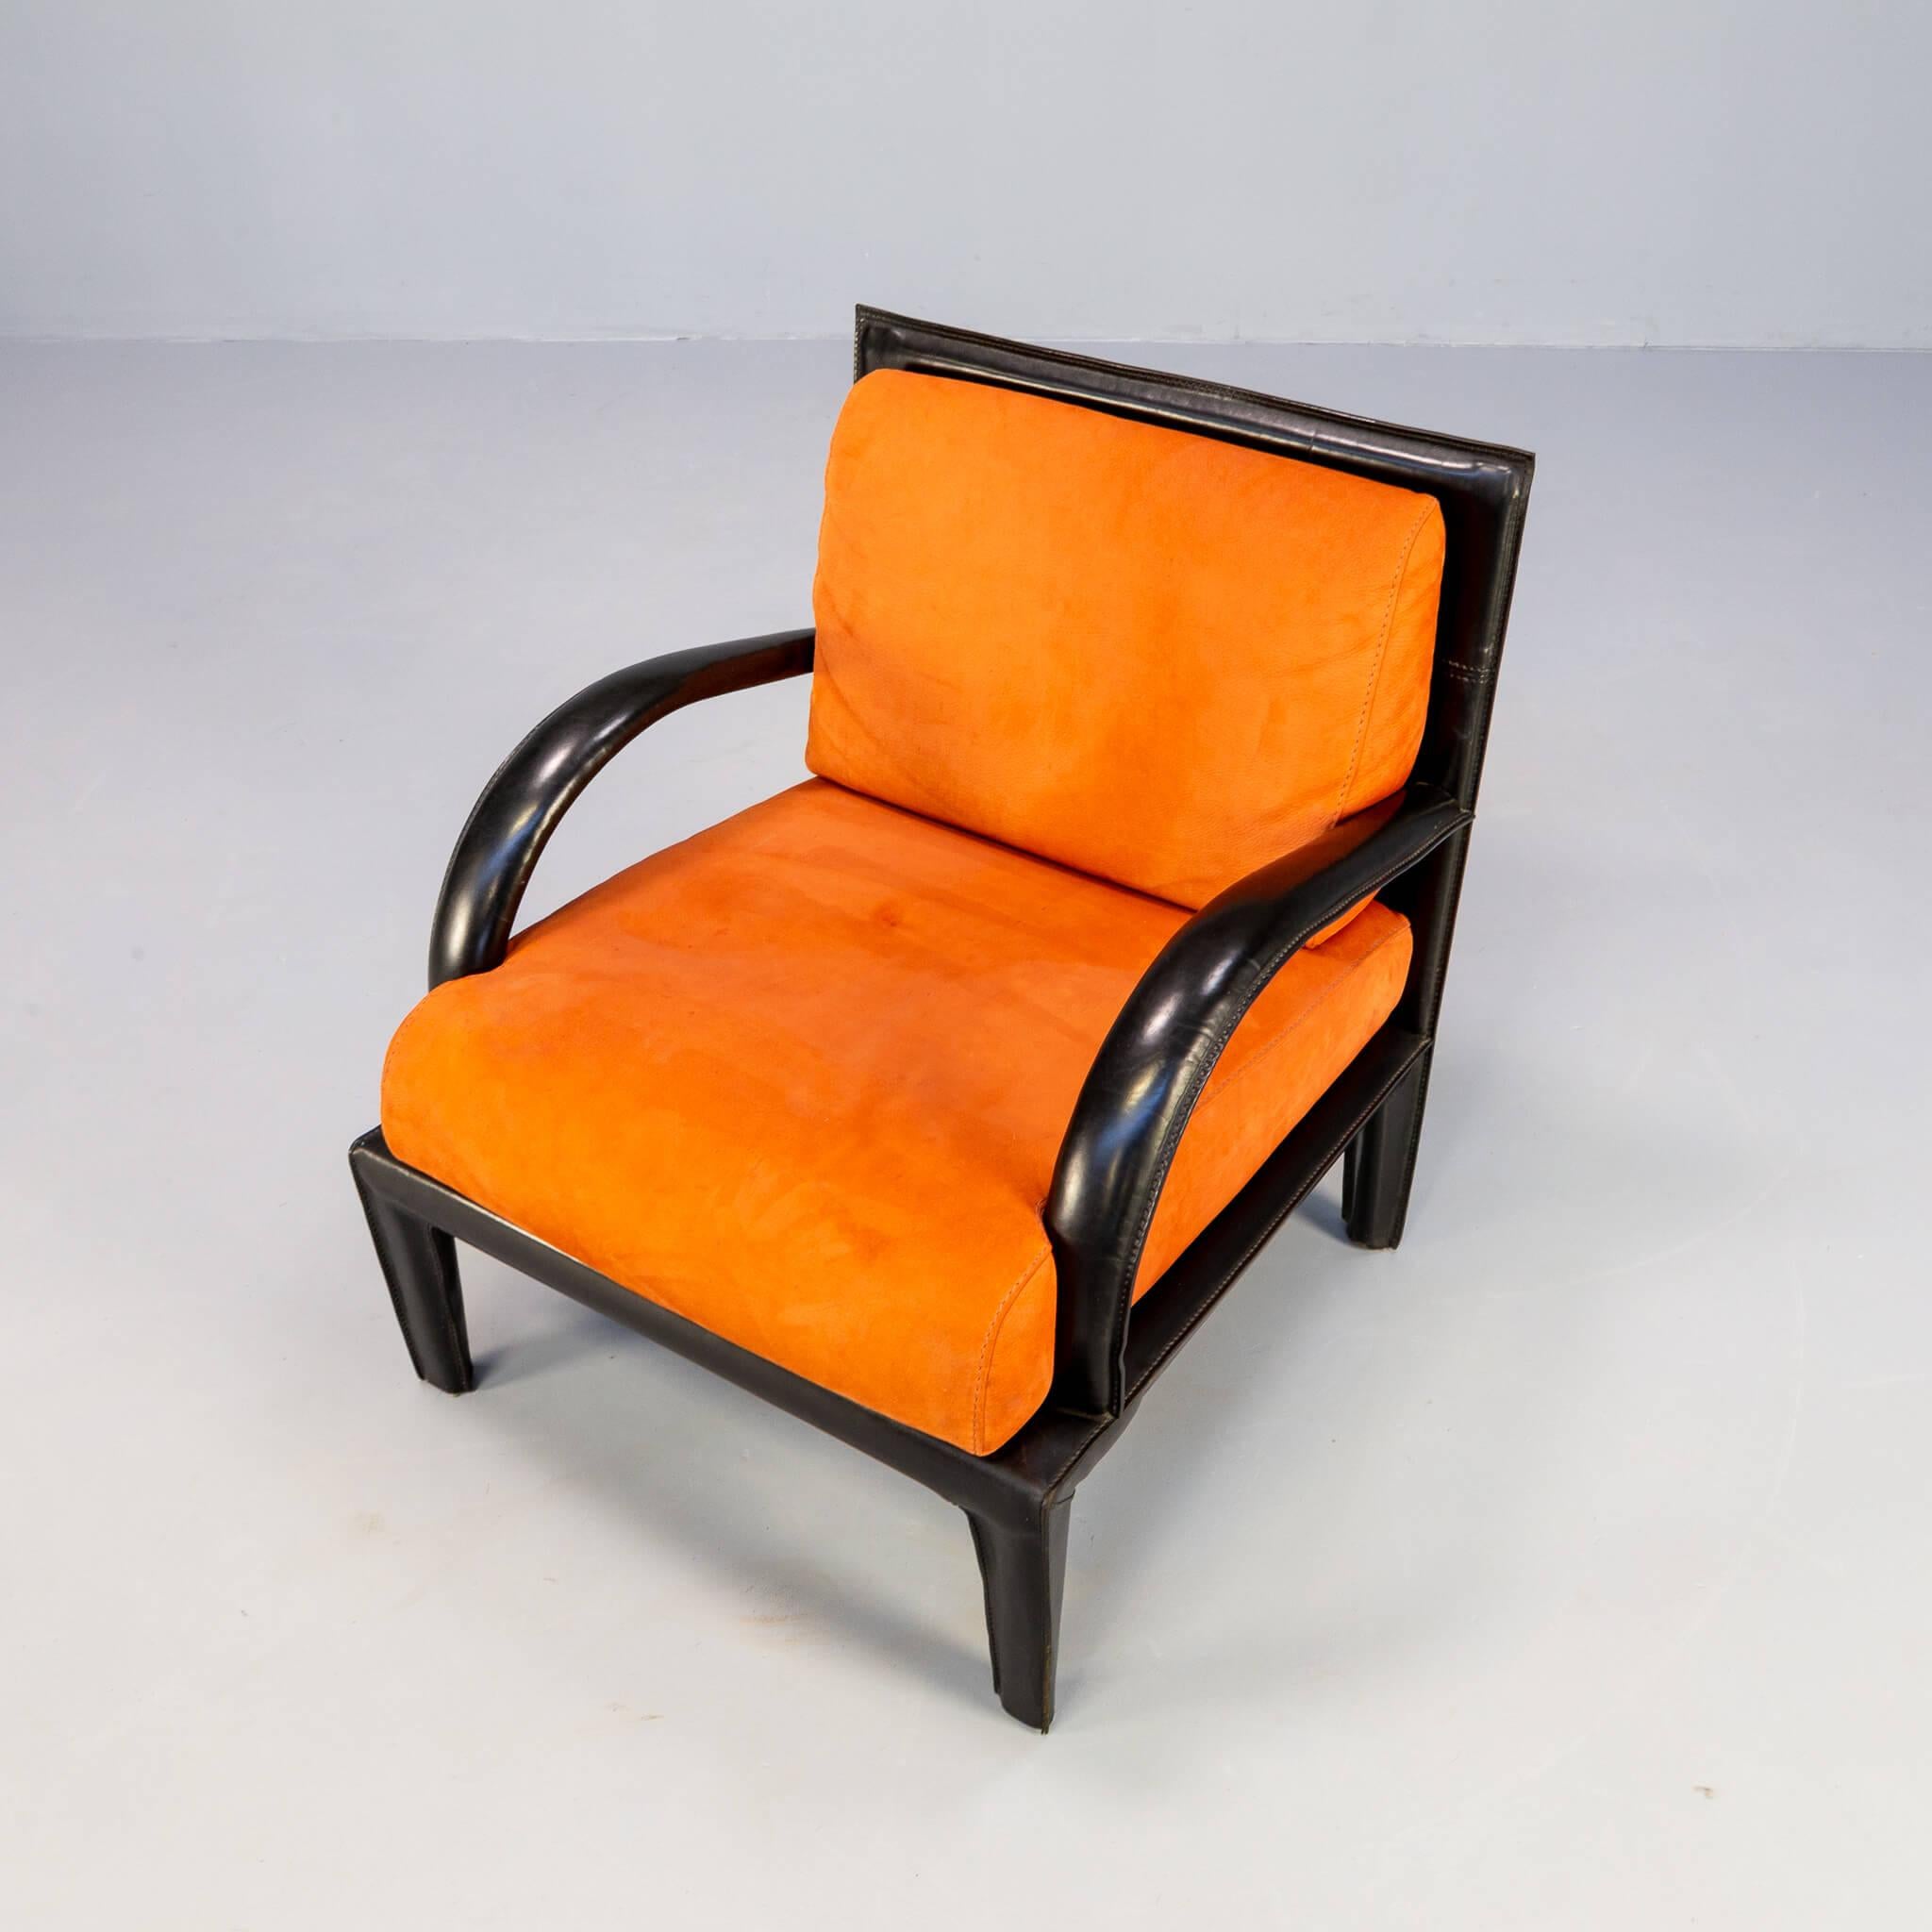 80s Lounge Chair for Roche Bobois In Good Condition For Sale In Amstelveen, Noord